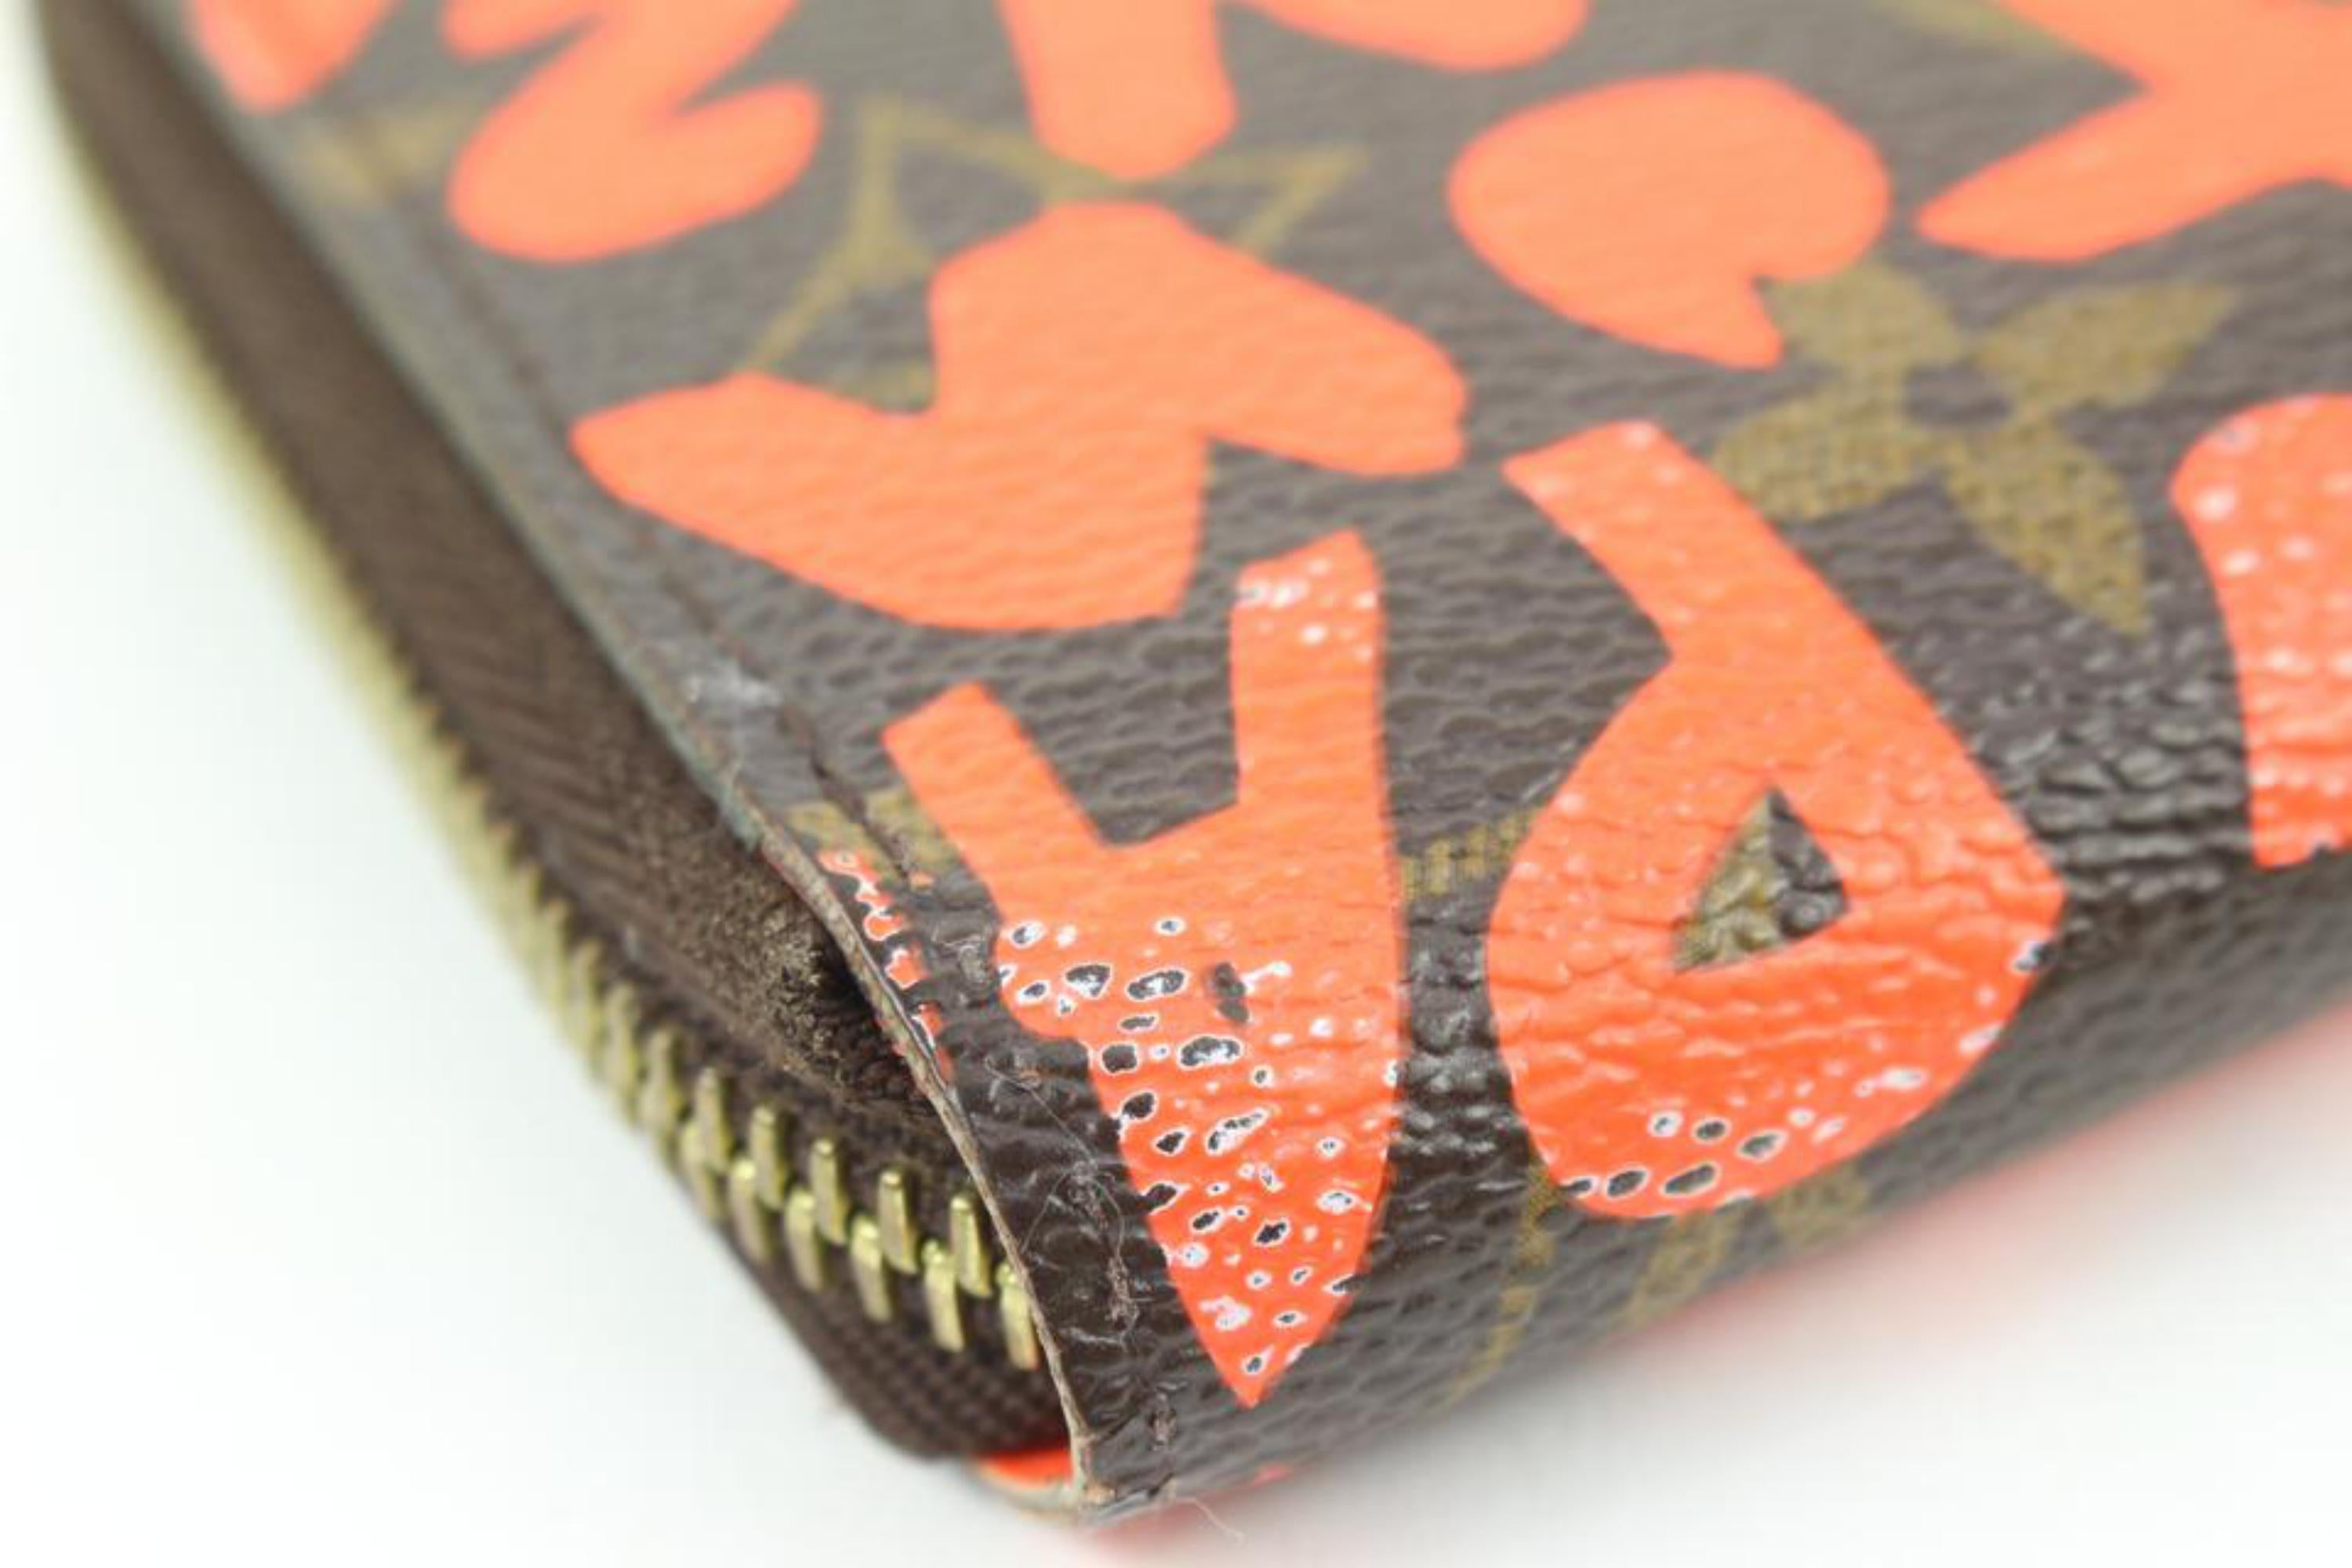 Louis Vuitton Stephen Sprouse Orange Graffiti Zippy Wallet Long Zip Around 118lv In Good Condition For Sale In Dix hills, NY